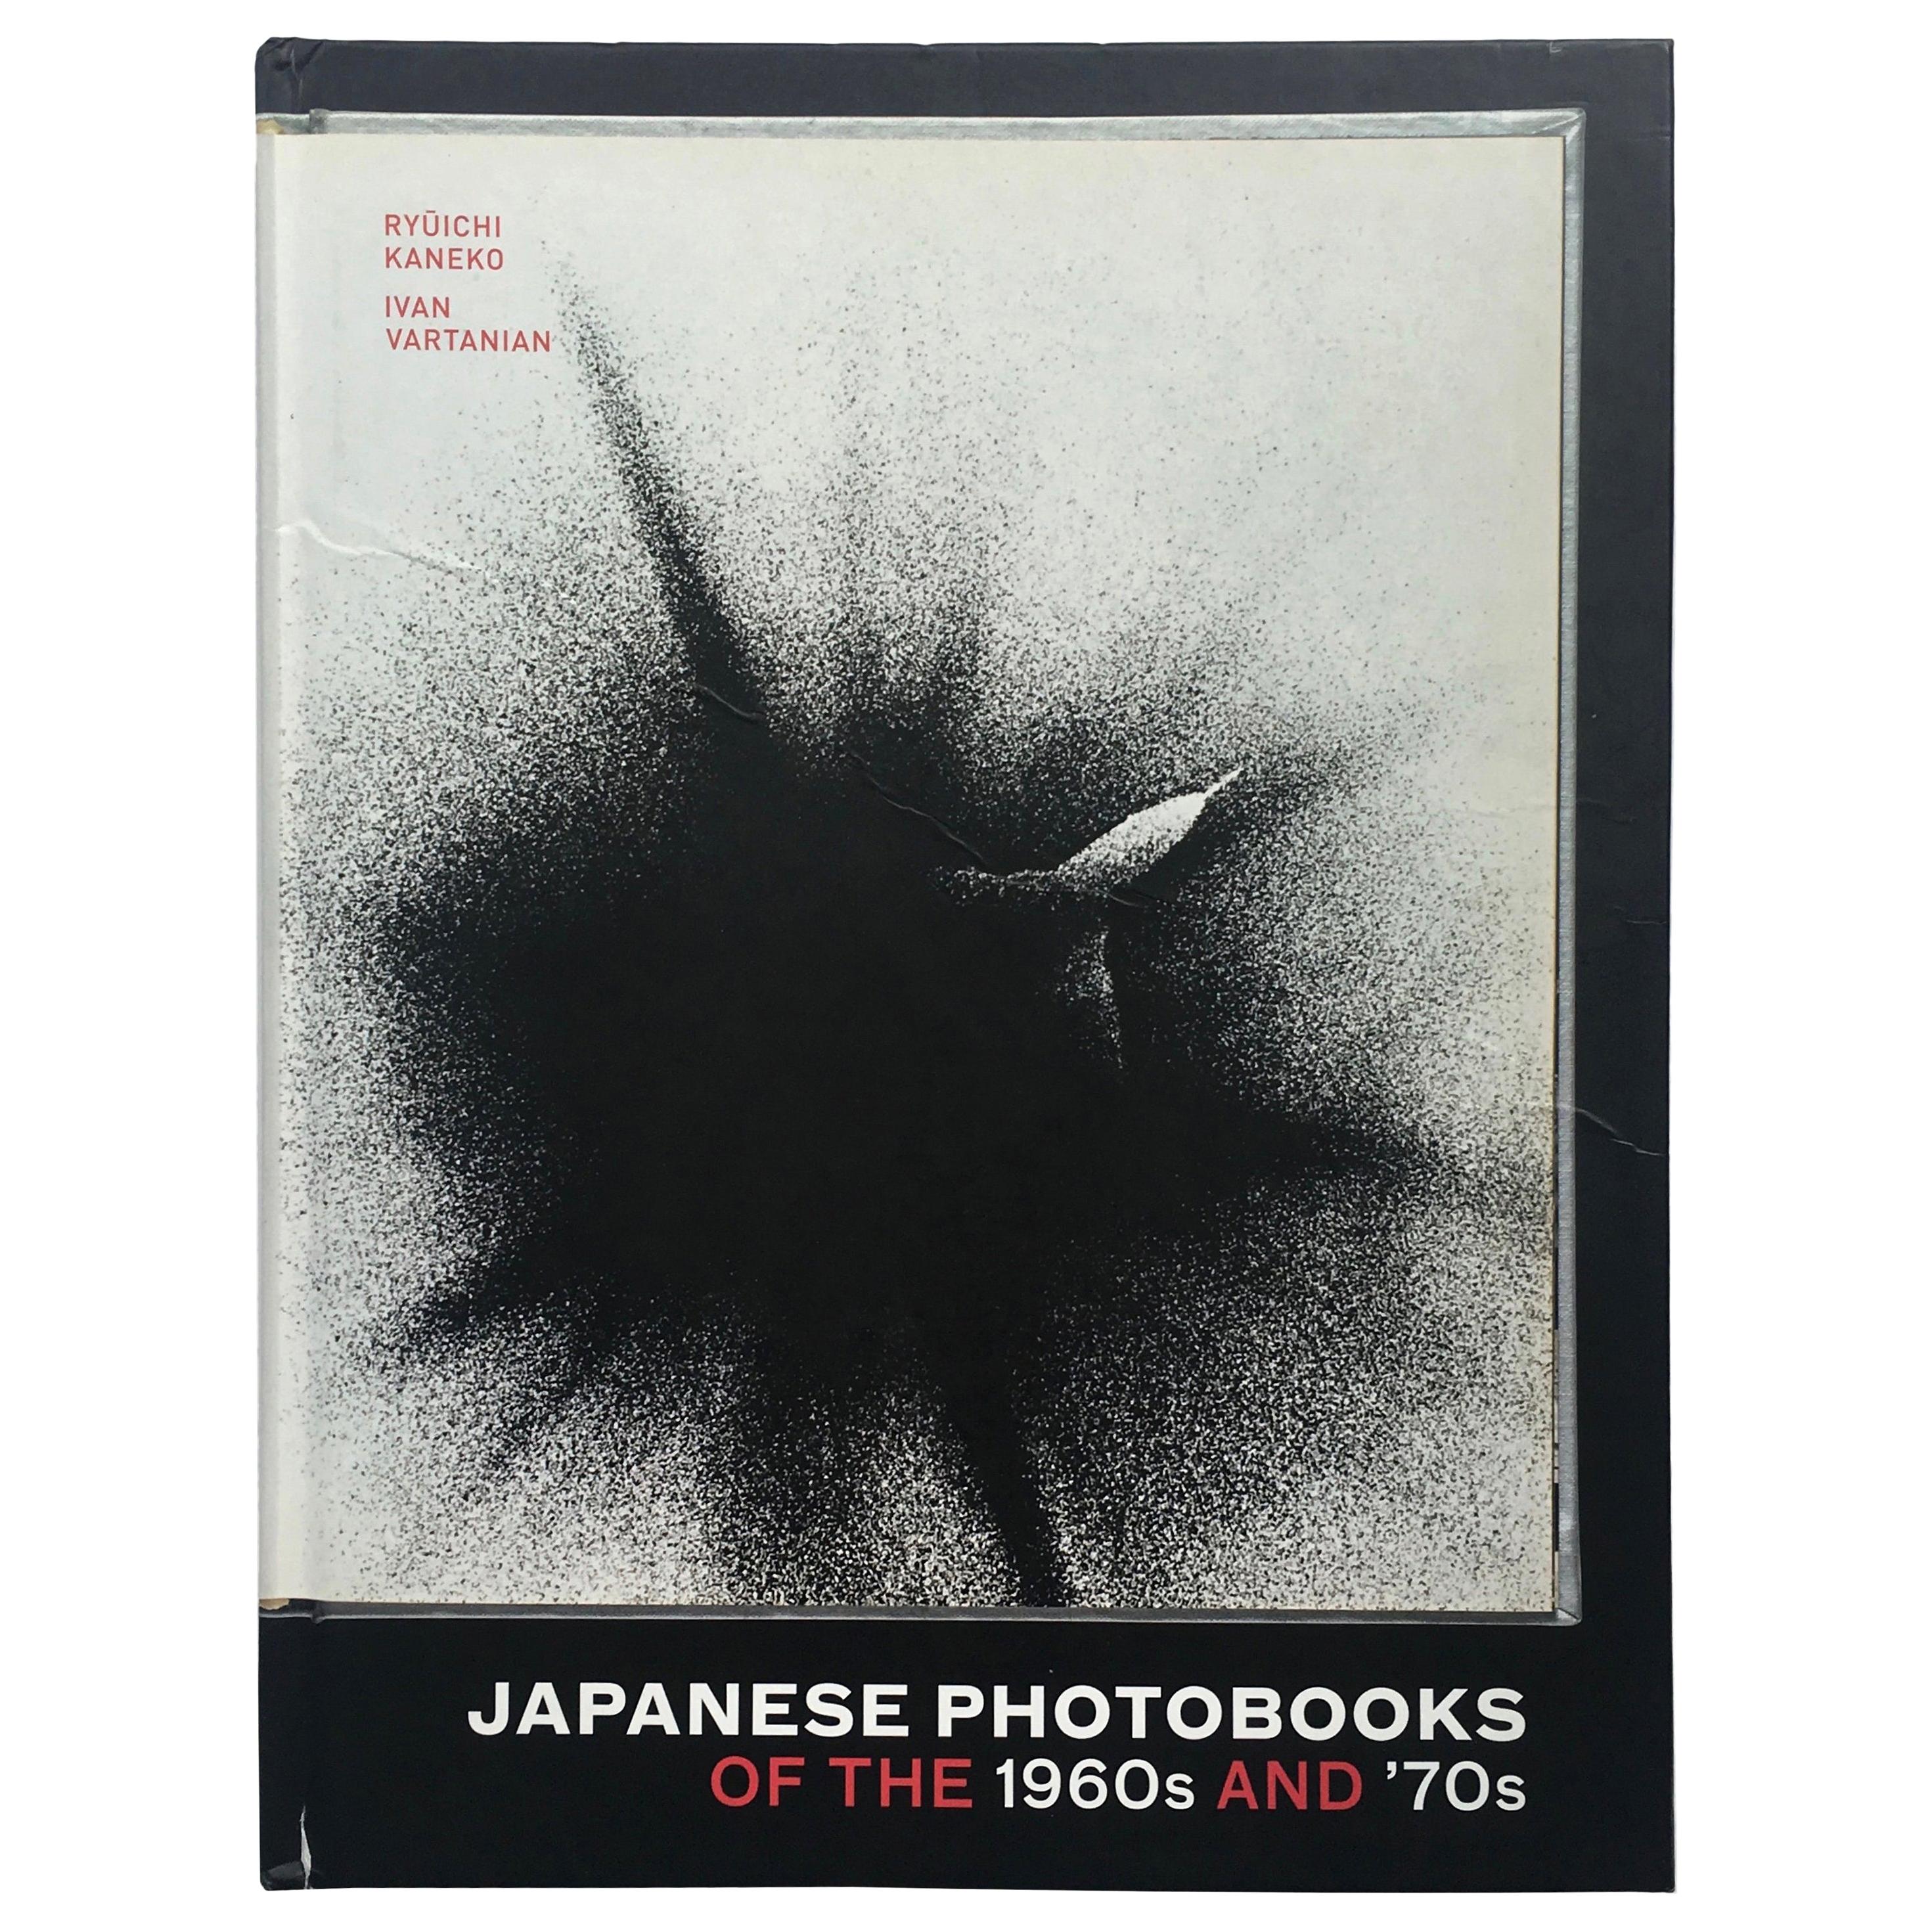 First Edition, published by Aperture, New York, 2009.

A comprehensive survey of some of the greatest and most iconic Japanese photobooks of the 1960s and 1970s; an era of major cultural and artistic change in the country, clearly visible in the